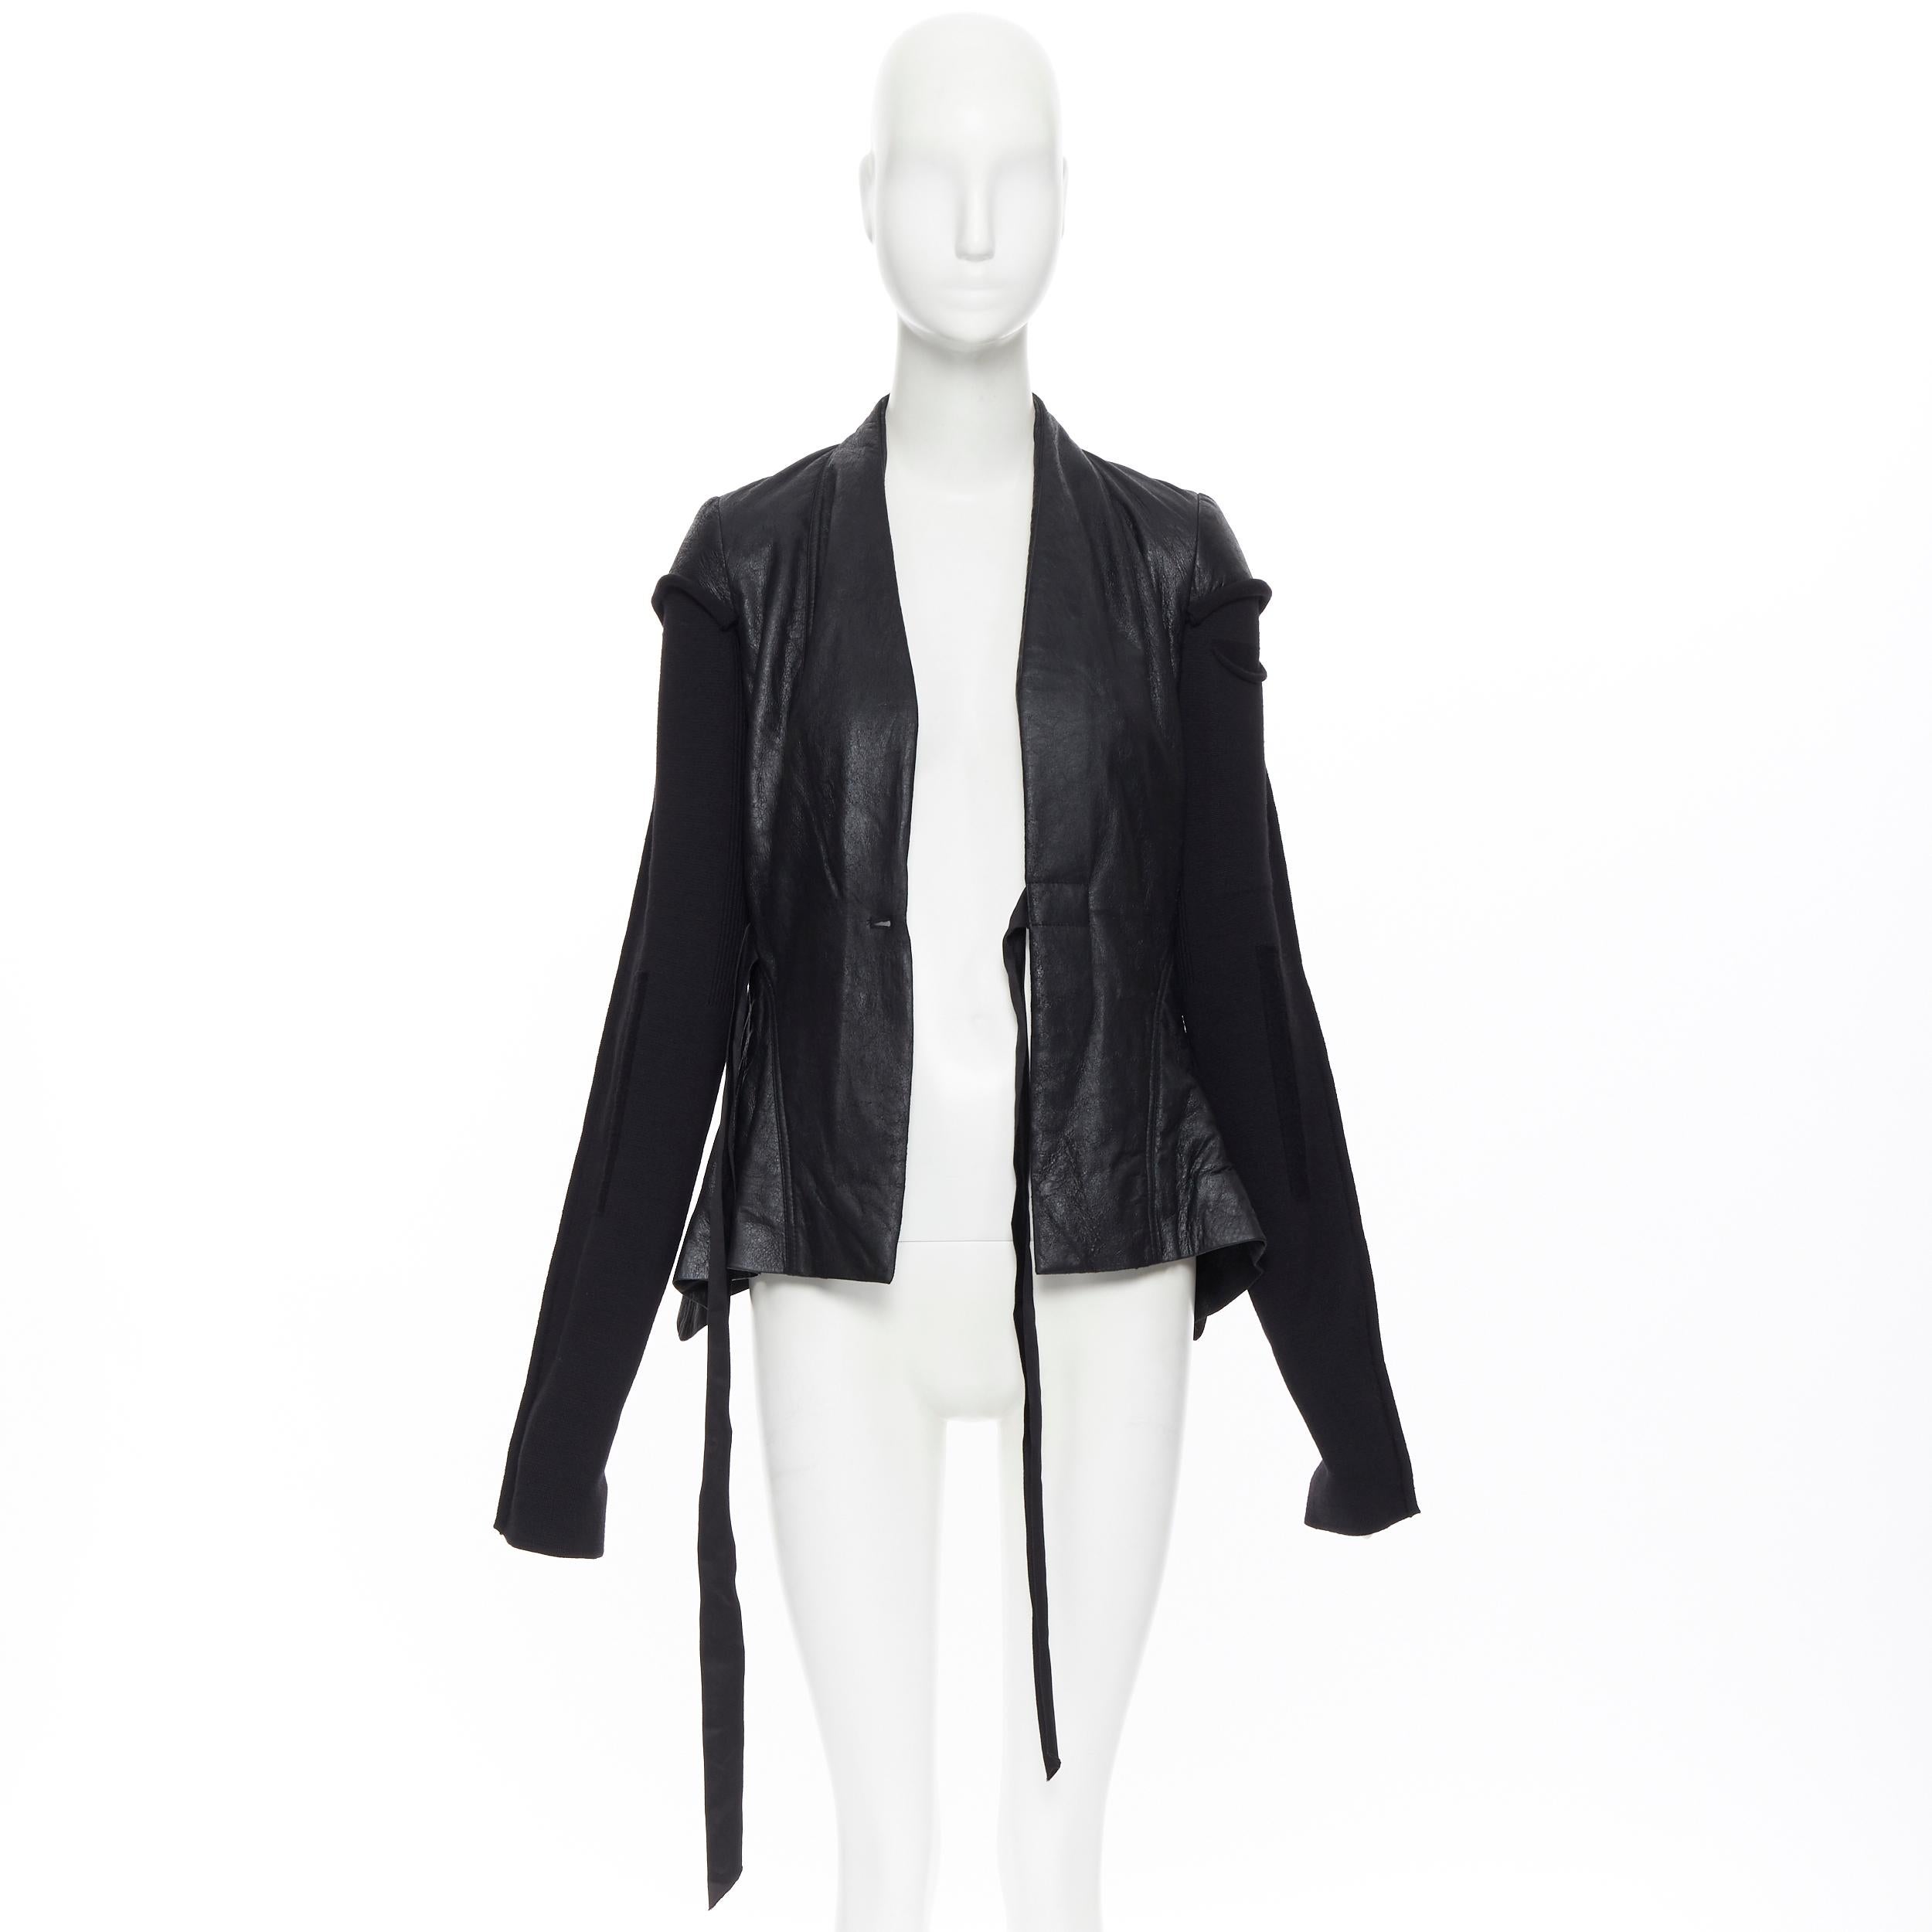 new RICK OWENS AW18 Wrap Princess deconstructed sleeves fitted leather jacket XS 
Reference: TGAS/A04811 
Brand: Rick Owens 
Designer: Rick Owens 
Collection: Fall Winter 2018 
Material: Leather 
Color: Black 
Pattern: Solid 
Closure: Tie 
Extra